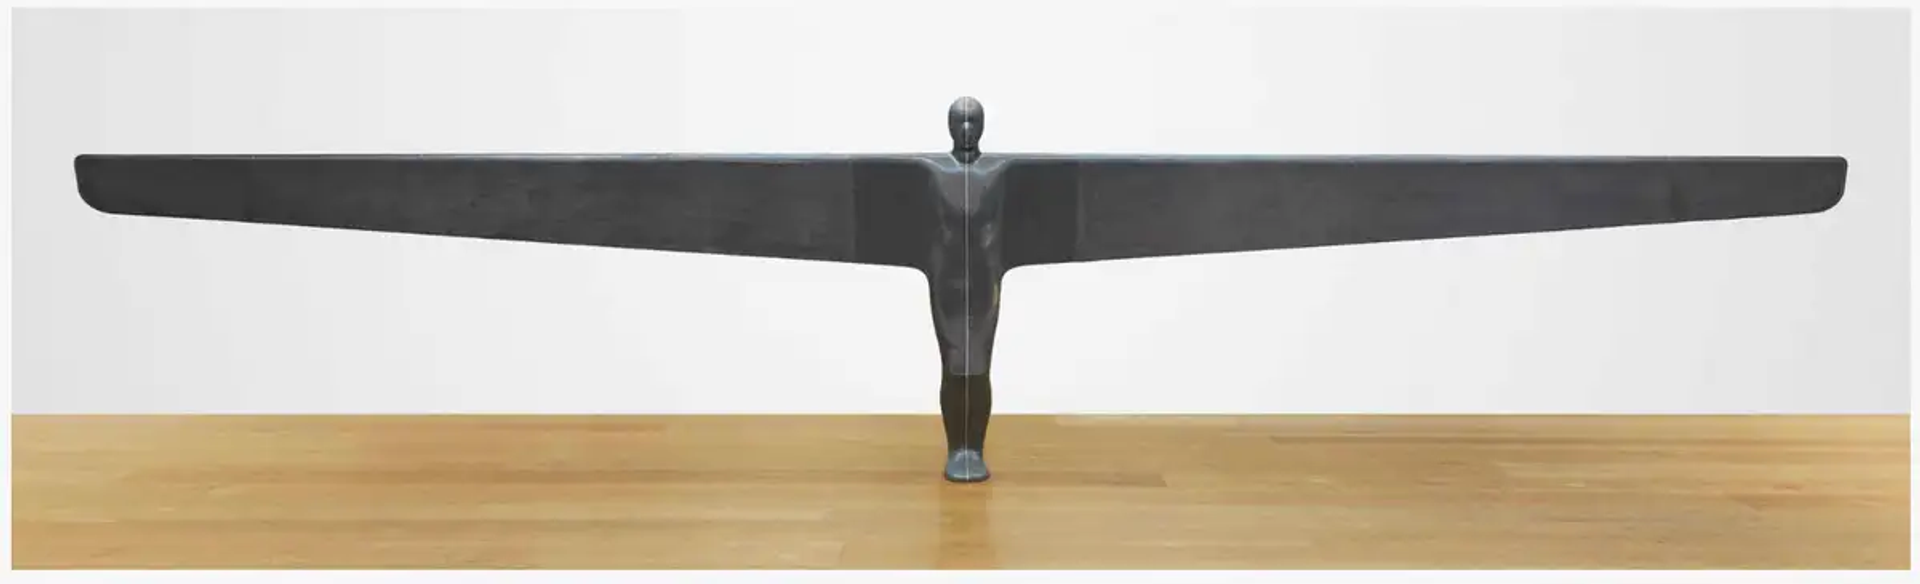 An image of the sculpture A Case For An Angel I by Antony Gormley, a metal sculpture showing an angel-like human figure with wide arms.